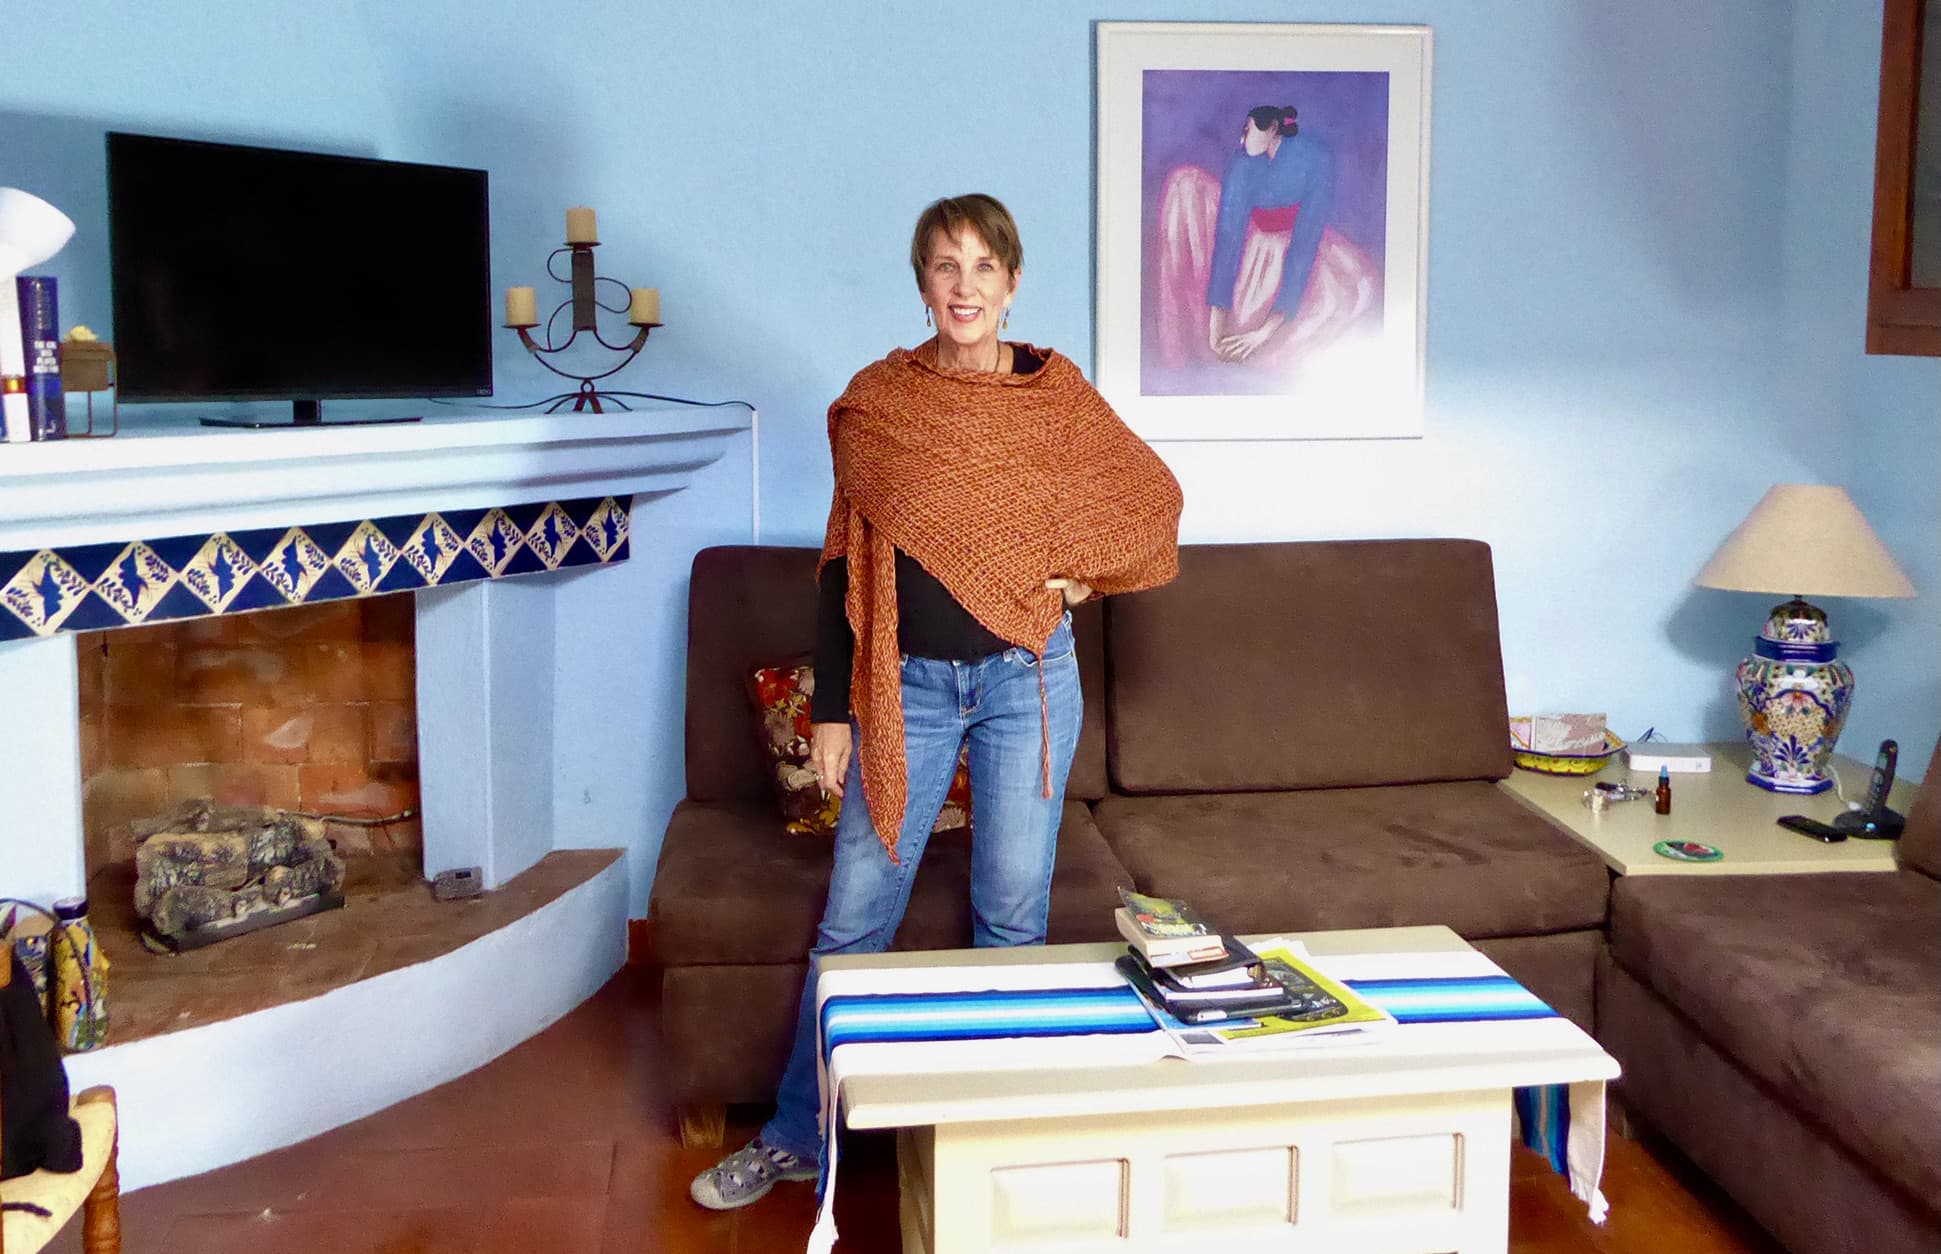 This 68-year-old retiree lives on 0 per month in Mexico. Take a look inside her 0,000 home